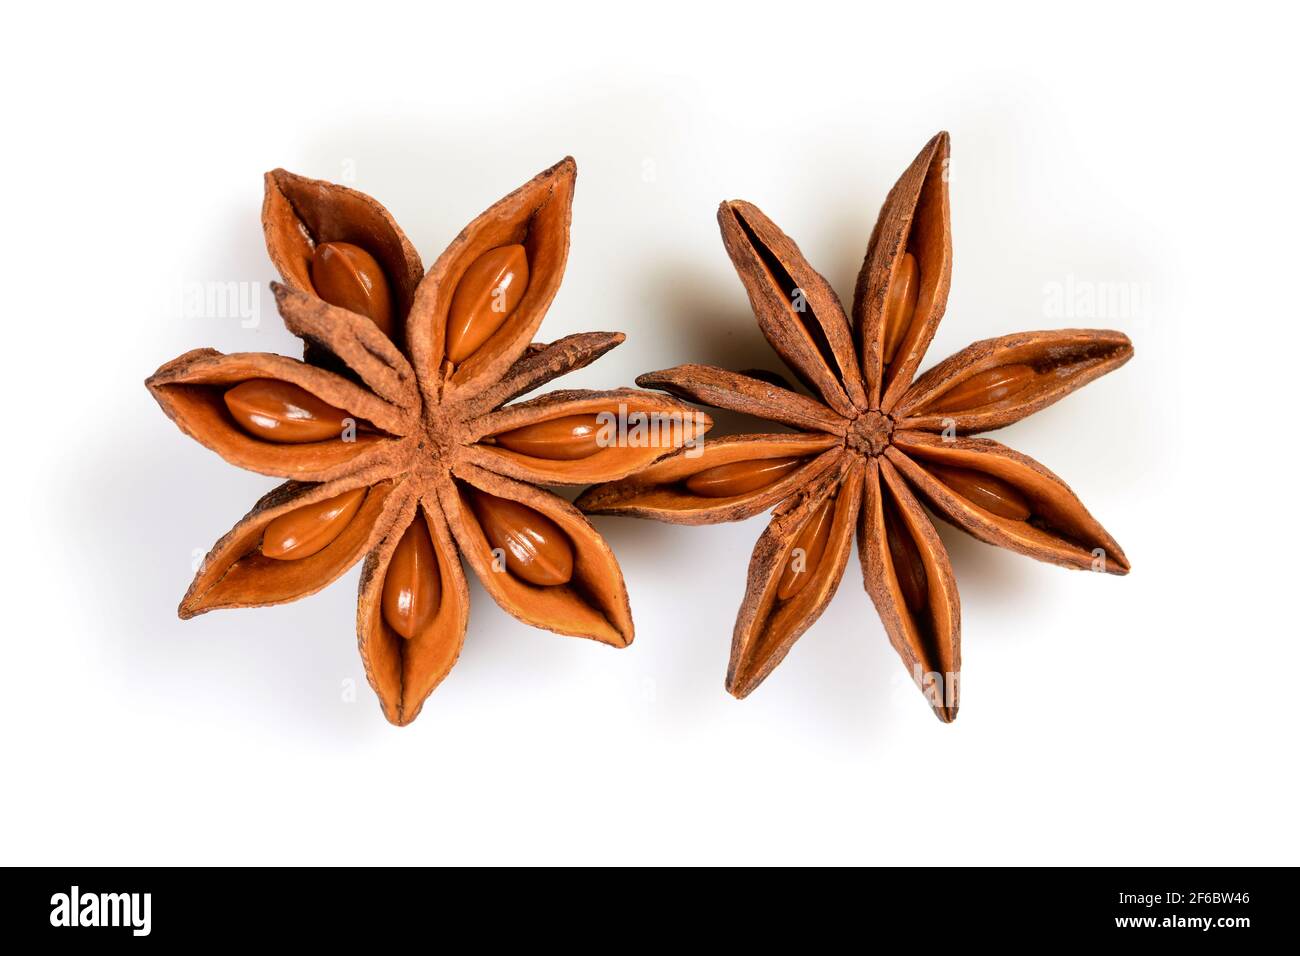 Star anise. Two star anise fruits. Macro close-up Isolated on white  background with shadow, top view of chinese badiane spice or Illicium verum  Stock Photo - Alamy